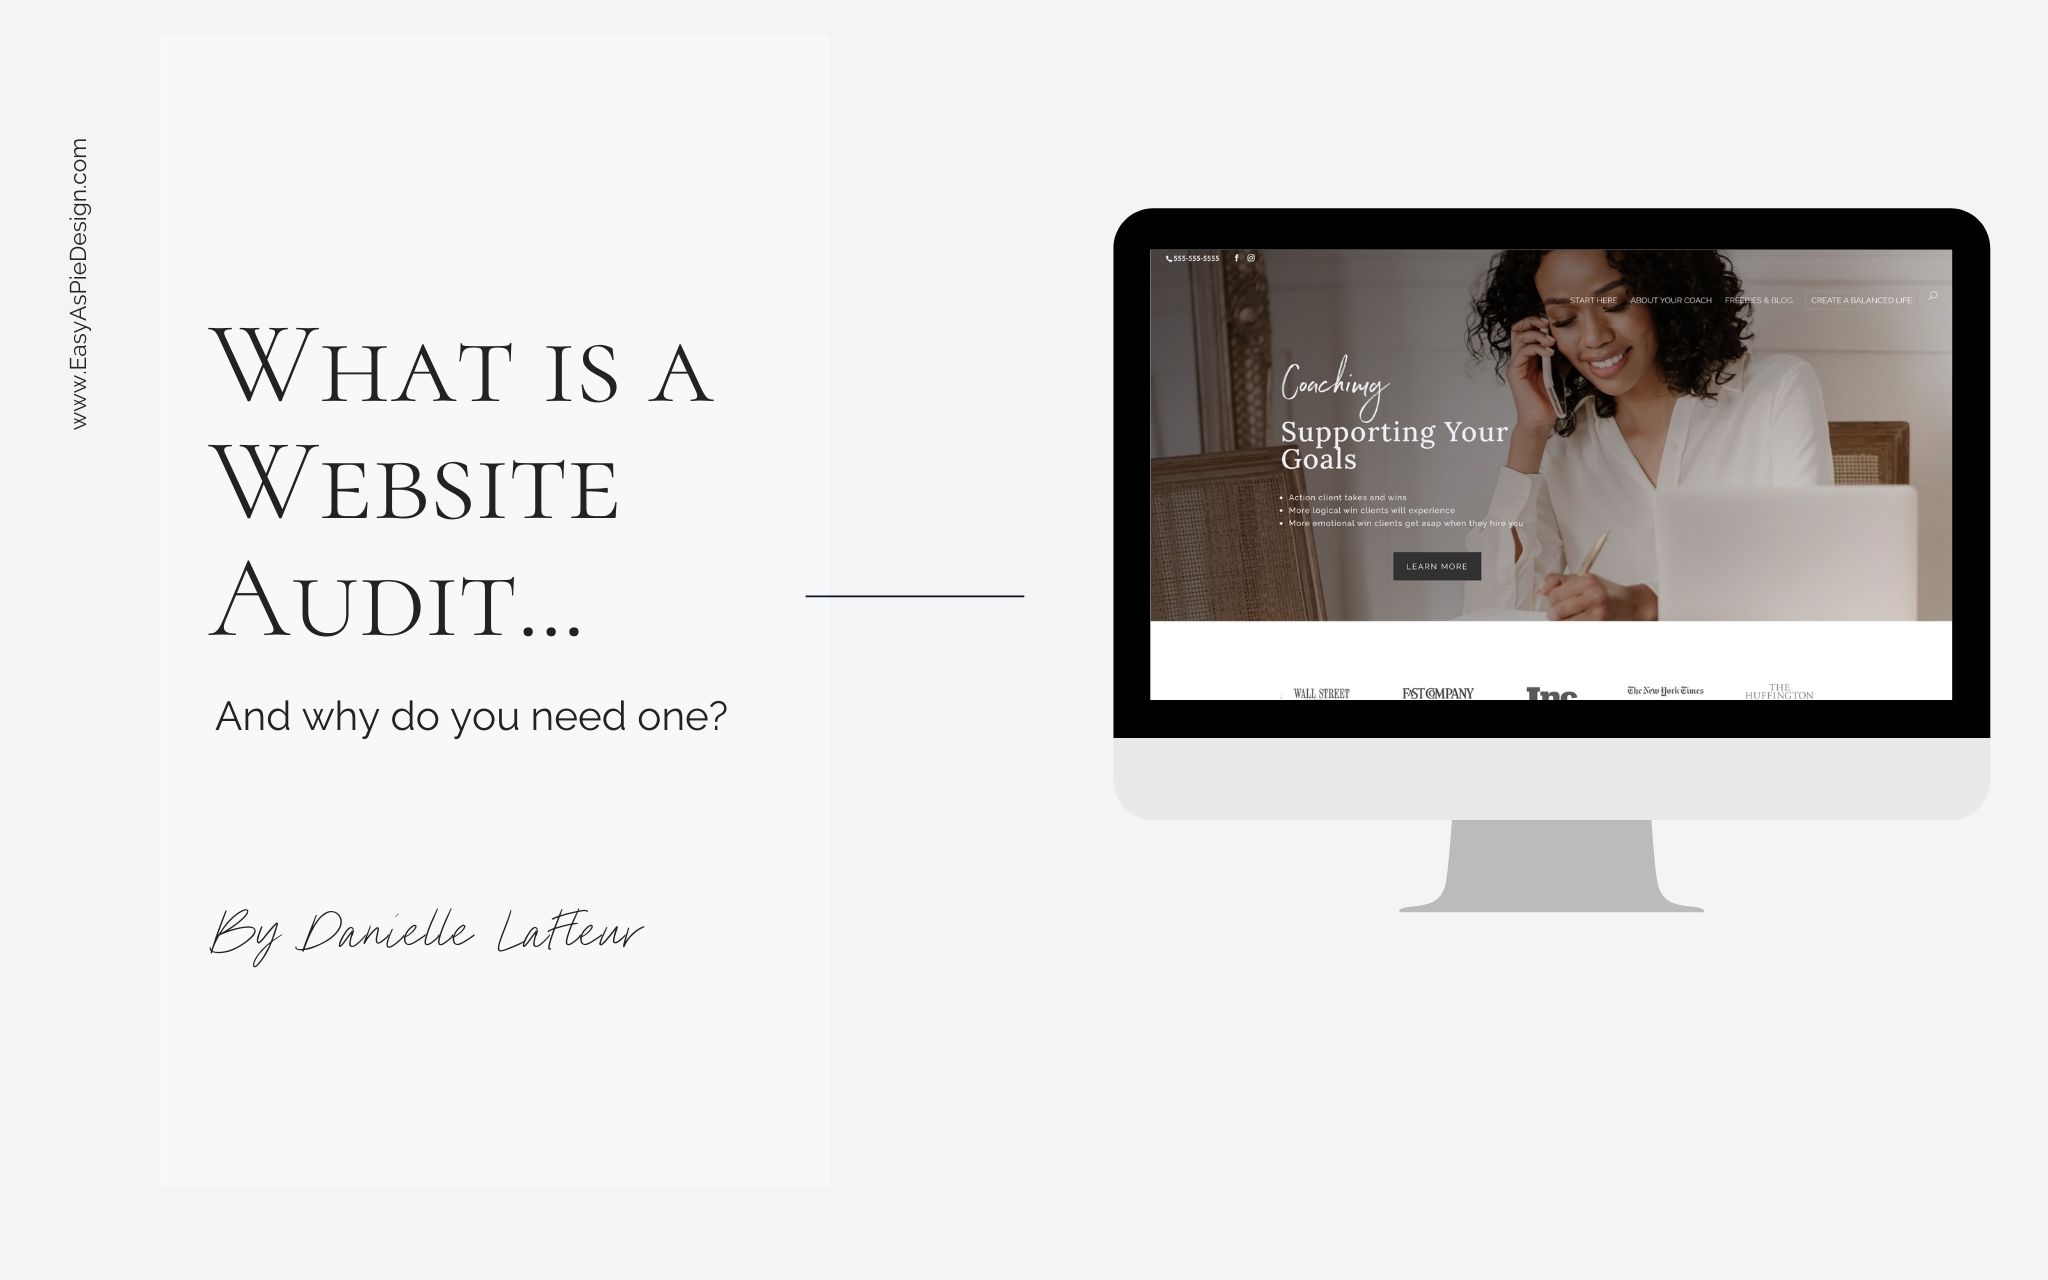 What is a Website Audit and Why Do You Need One?